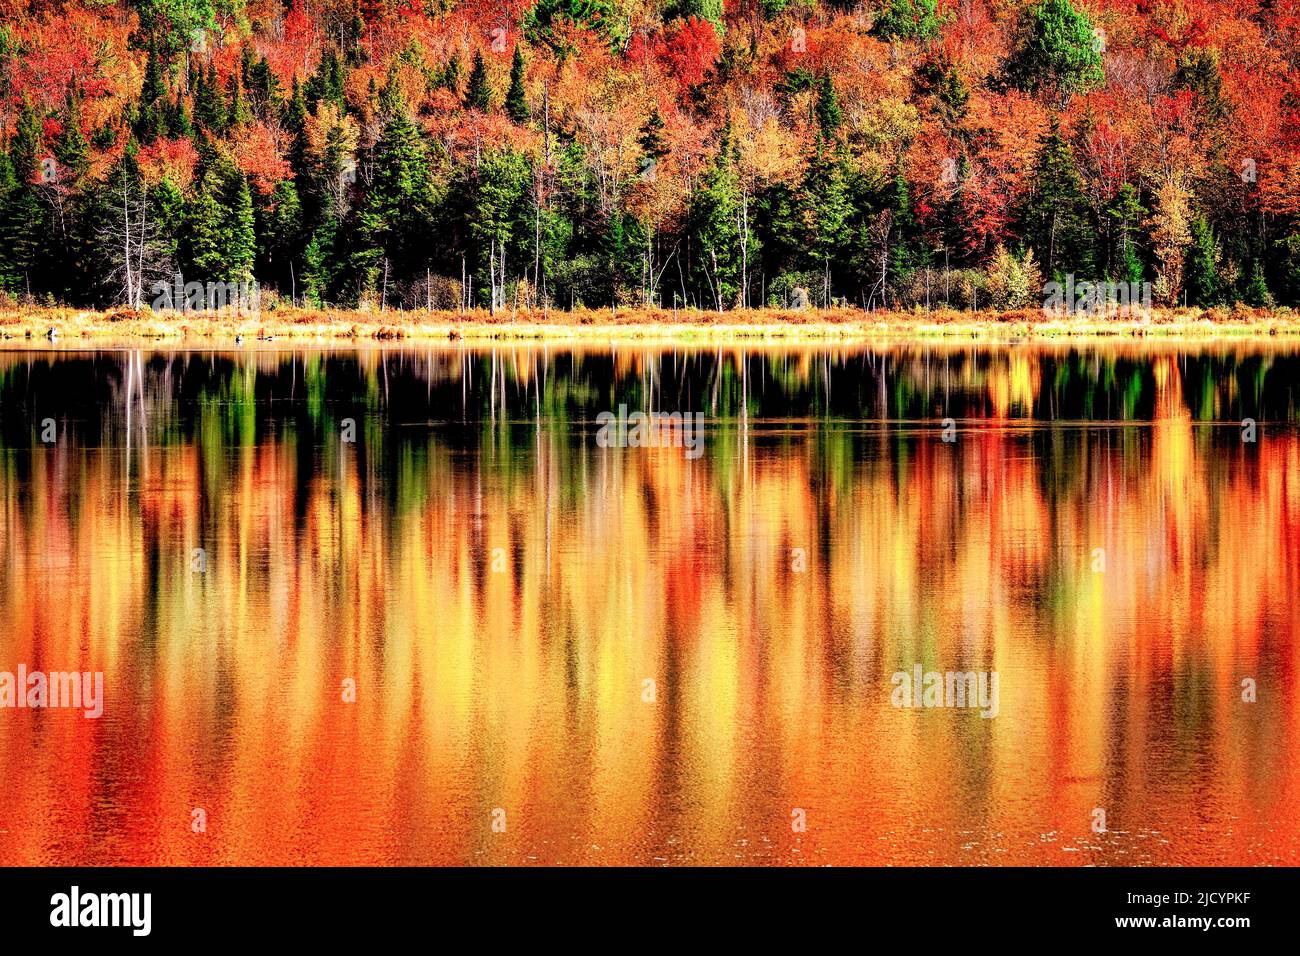 Fall color reflects in the still waters of Long Pond near Belvidere Corners, Vermont. Stock Photo